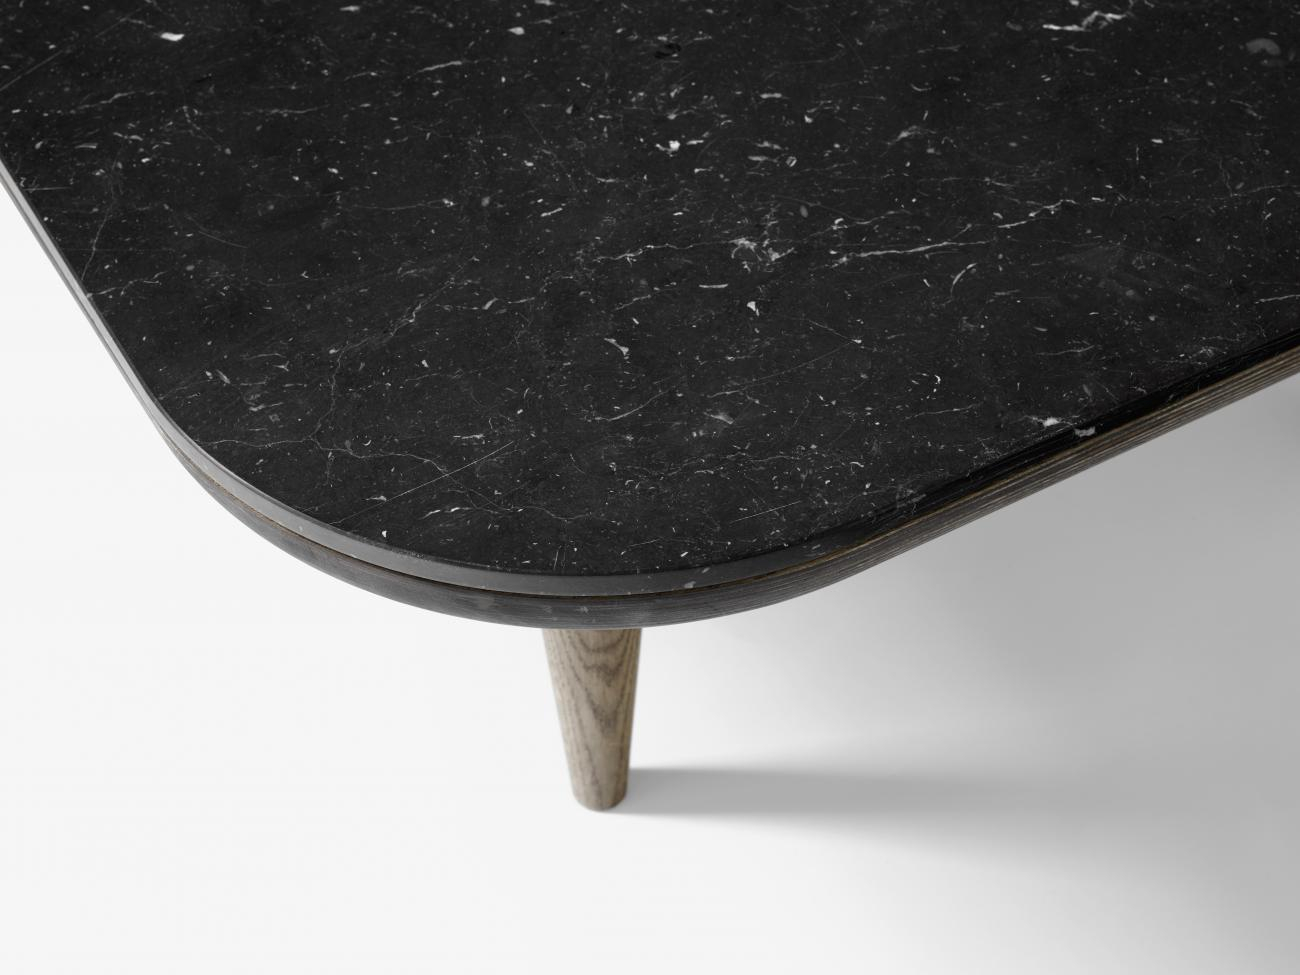 https://www.fundesign.nl/media/catalog/product/f/l/fly_honed_nero_marquina_marble_sc4.jpg